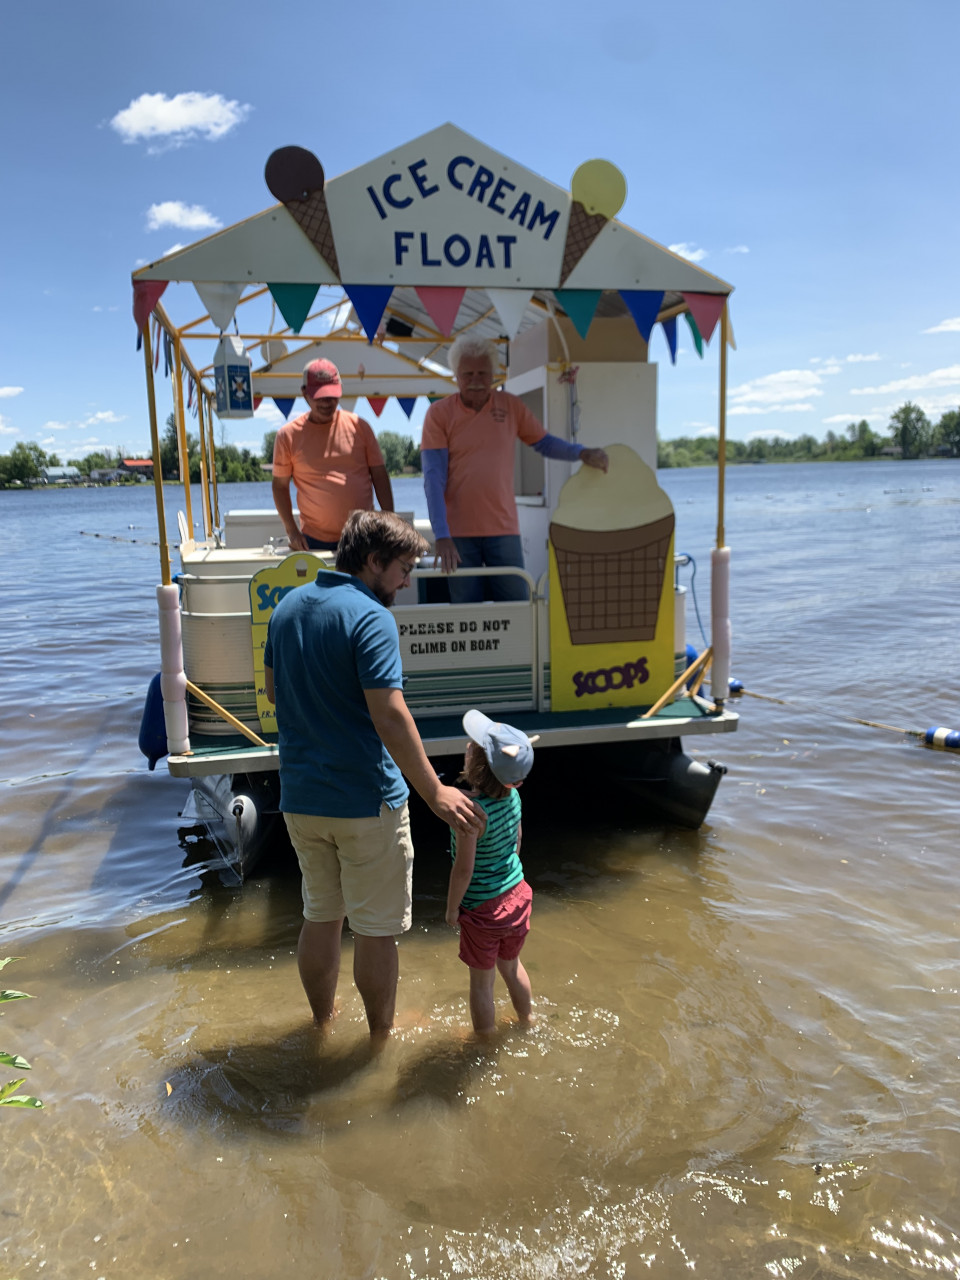 A man and child stand in front of a pontoon boat decorated with ice cream cone signs in the shallow waters at Baxter Beach.